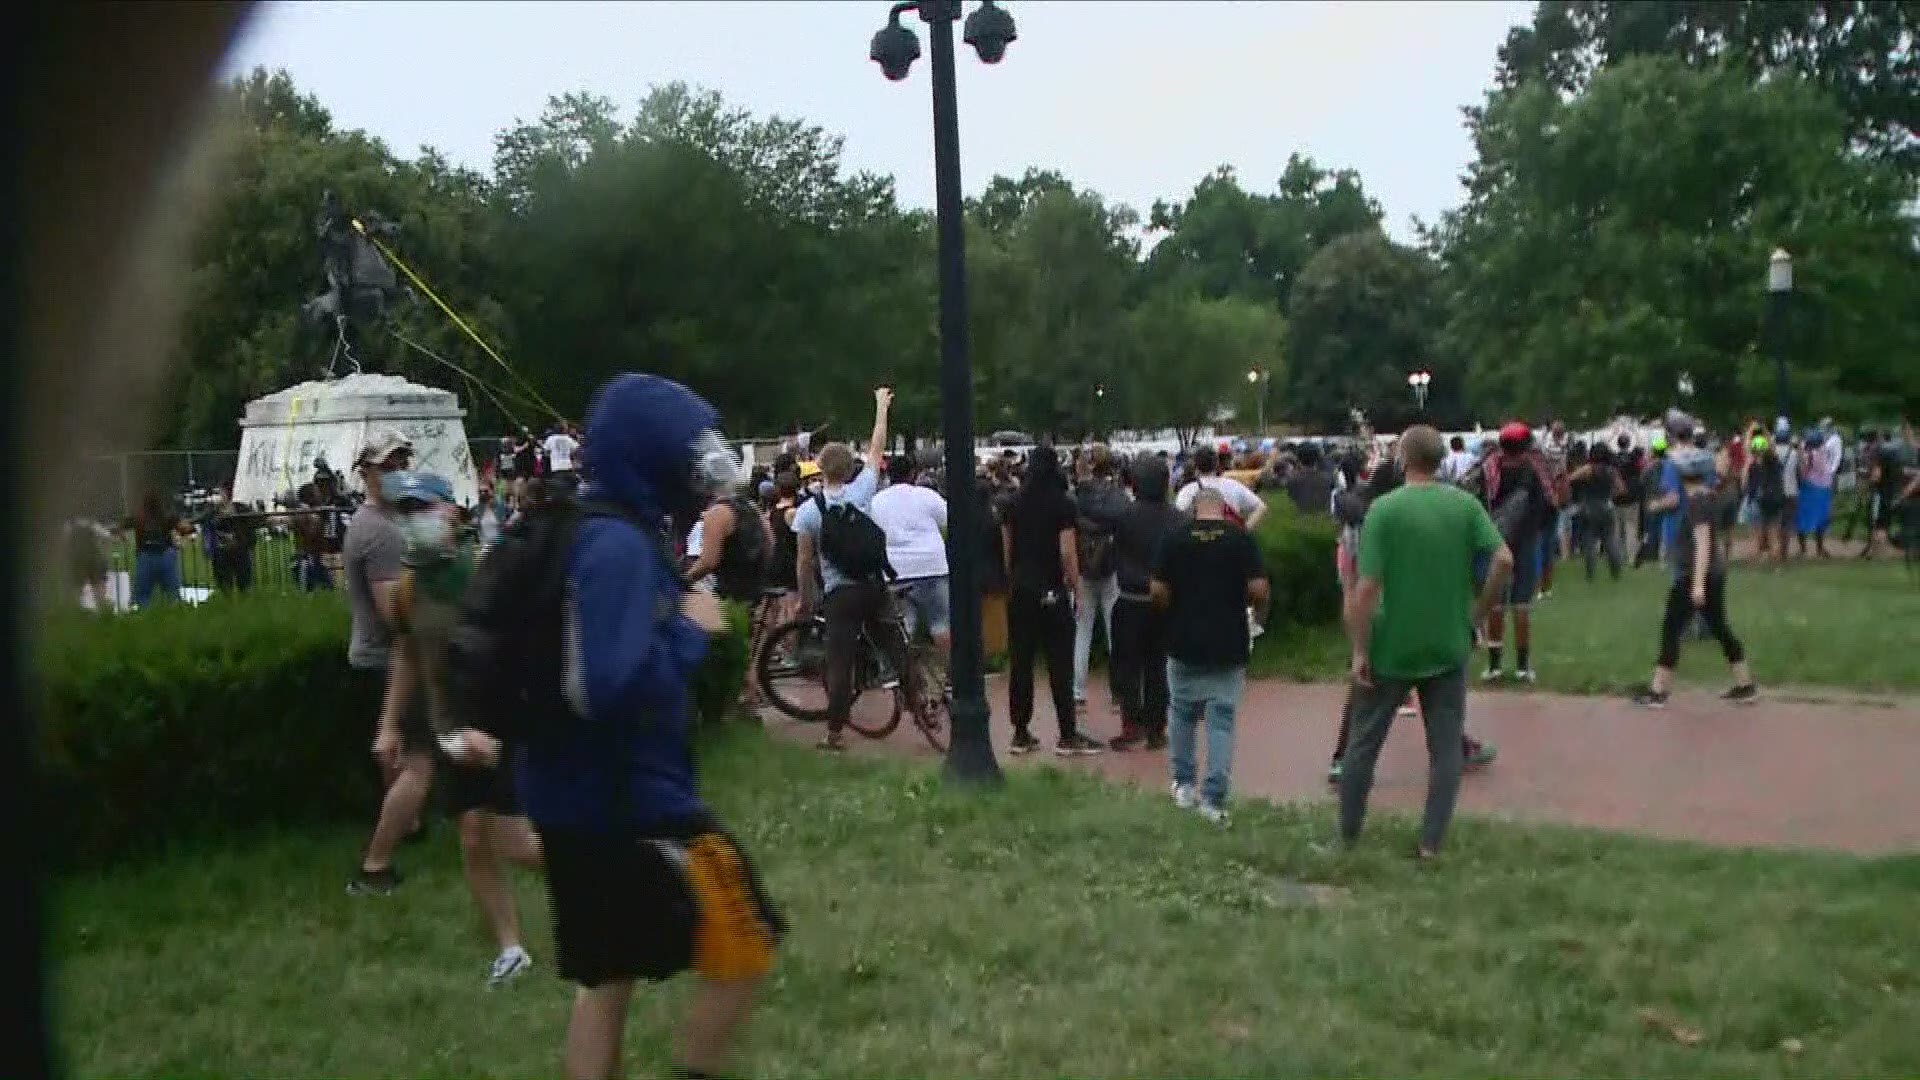 Police responded and quickly started clearing the crowd away from the statue and out of Lafayette Square using a bicycle barricade and deploying pepper spray.